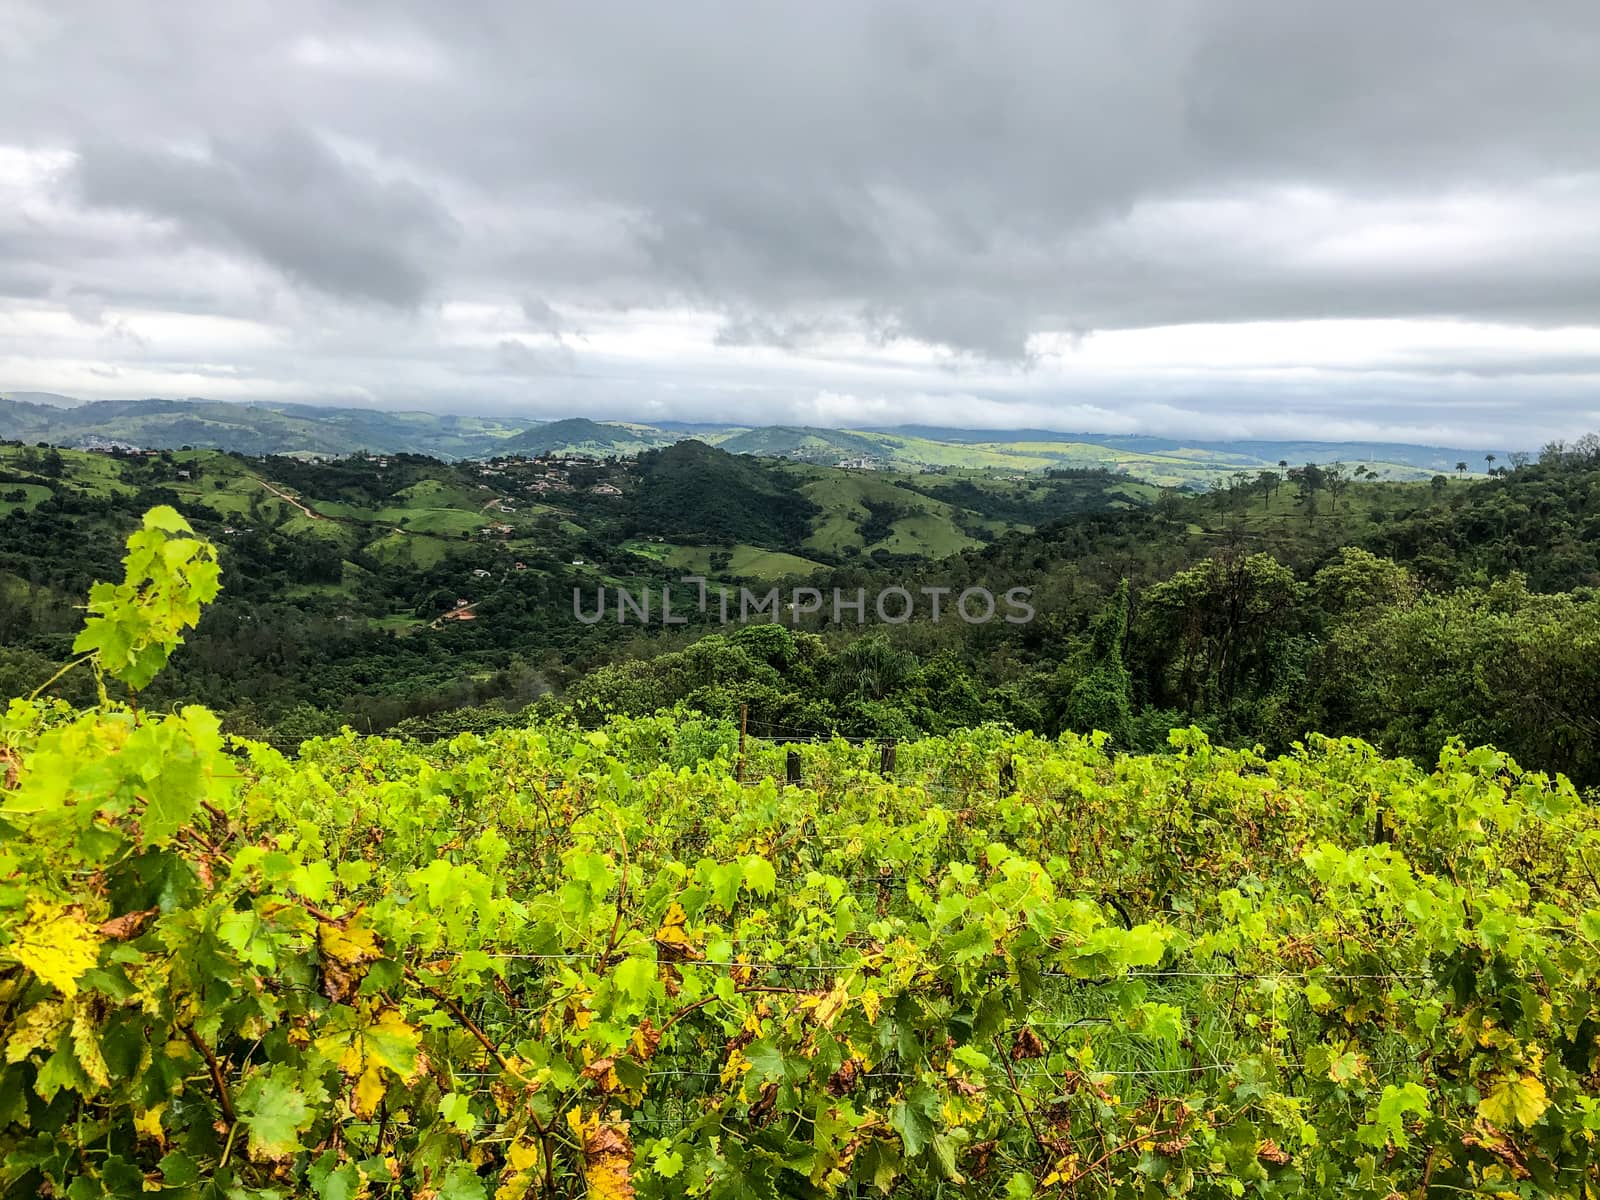 Vineyards in the mountain during cloudy raining season. Grapevines in the green hills. Vineyards for making wine grown in the valleys on rainy days and fog blowing through.